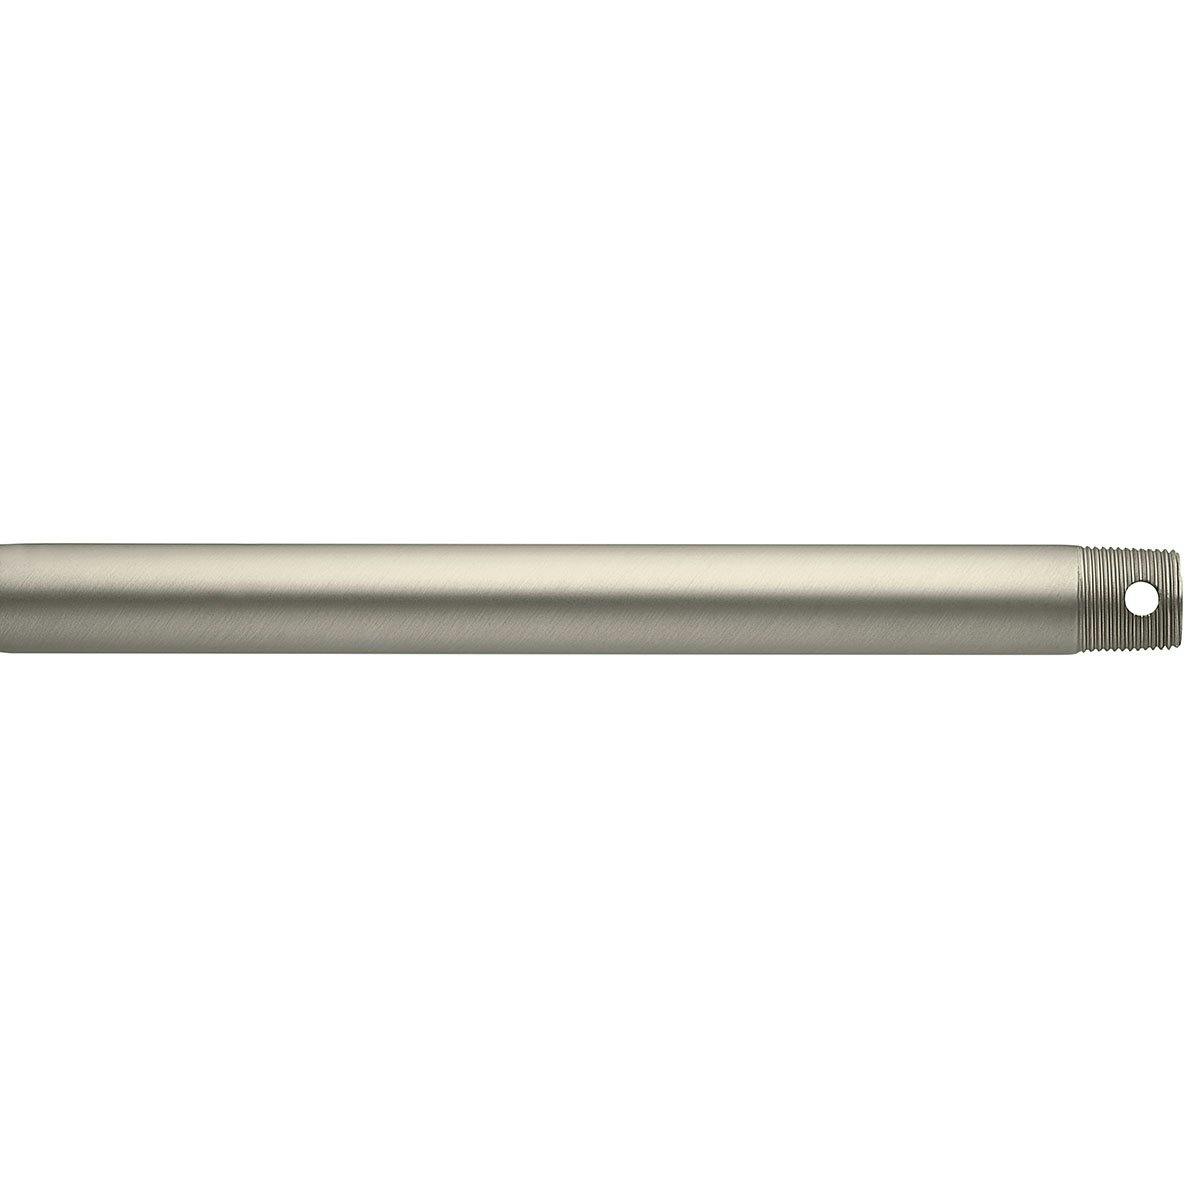 Dual Threaded 60" Downrod Brushed Nickel on a white background